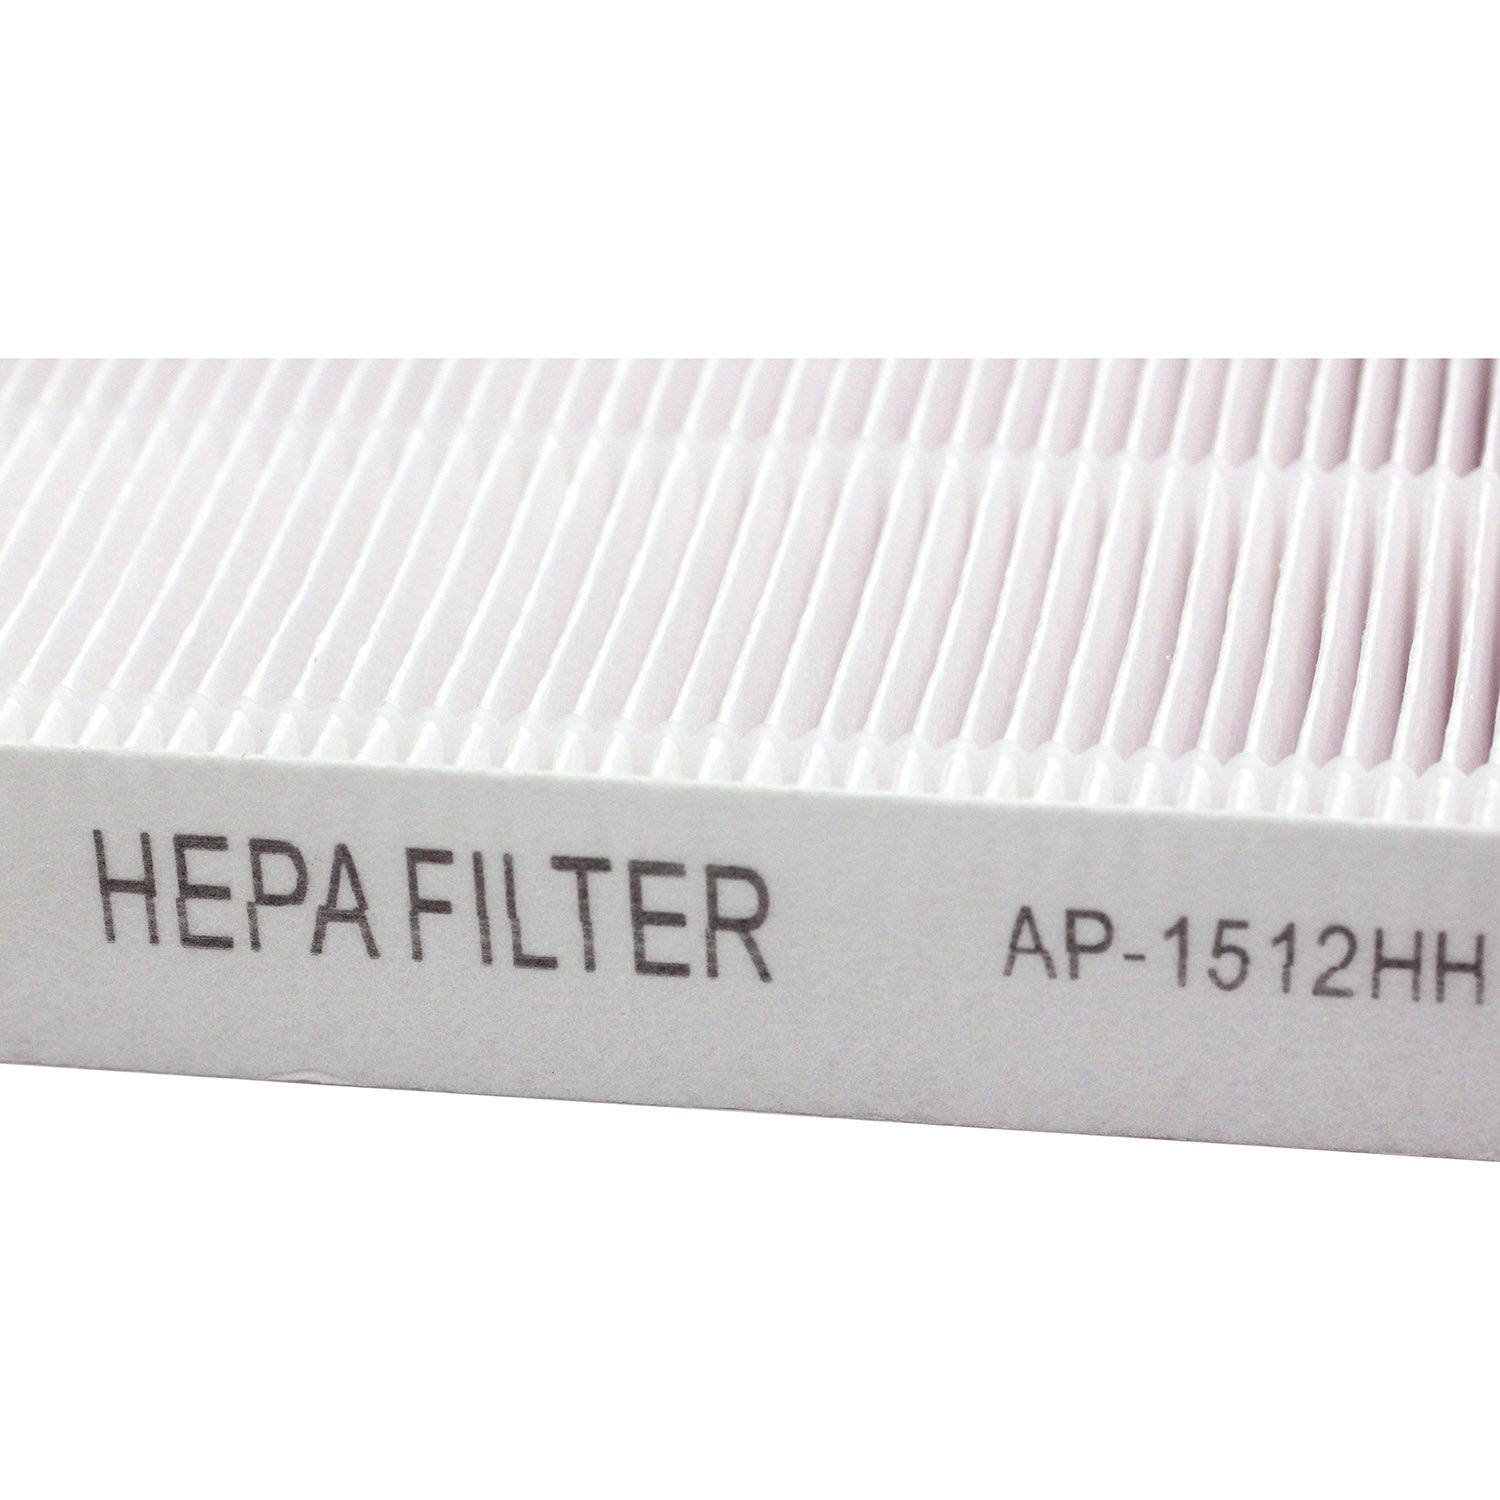 Maximalpower Replacement HEPA Filter & Hard Carbon Pre-Filter for Levoit PUR131 Air Purifier 1 Set